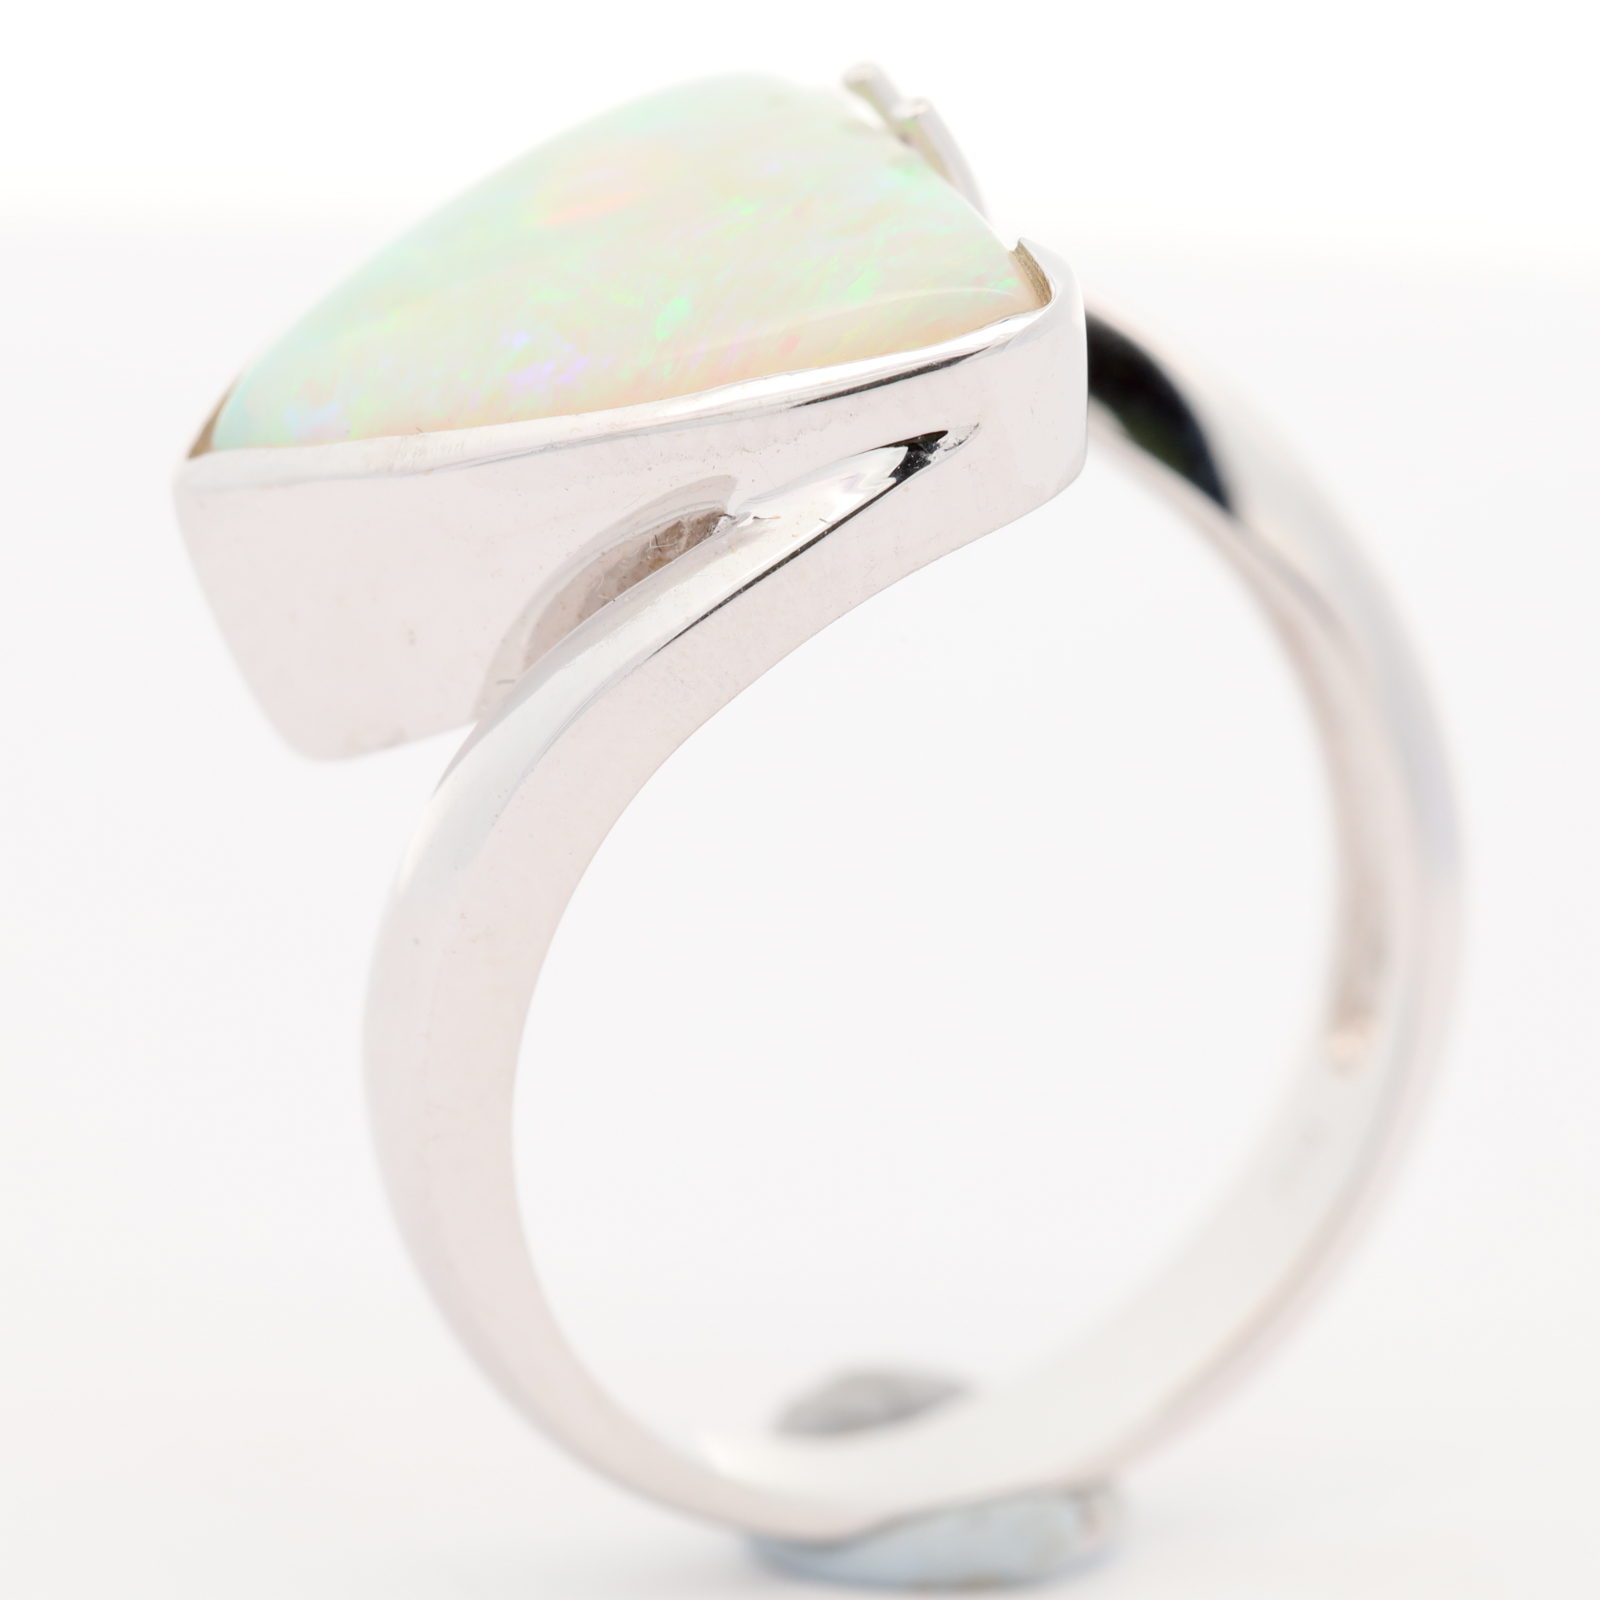 Blue Orange and Green White Gold Solid Australian Crystal Opal Engagement Ring